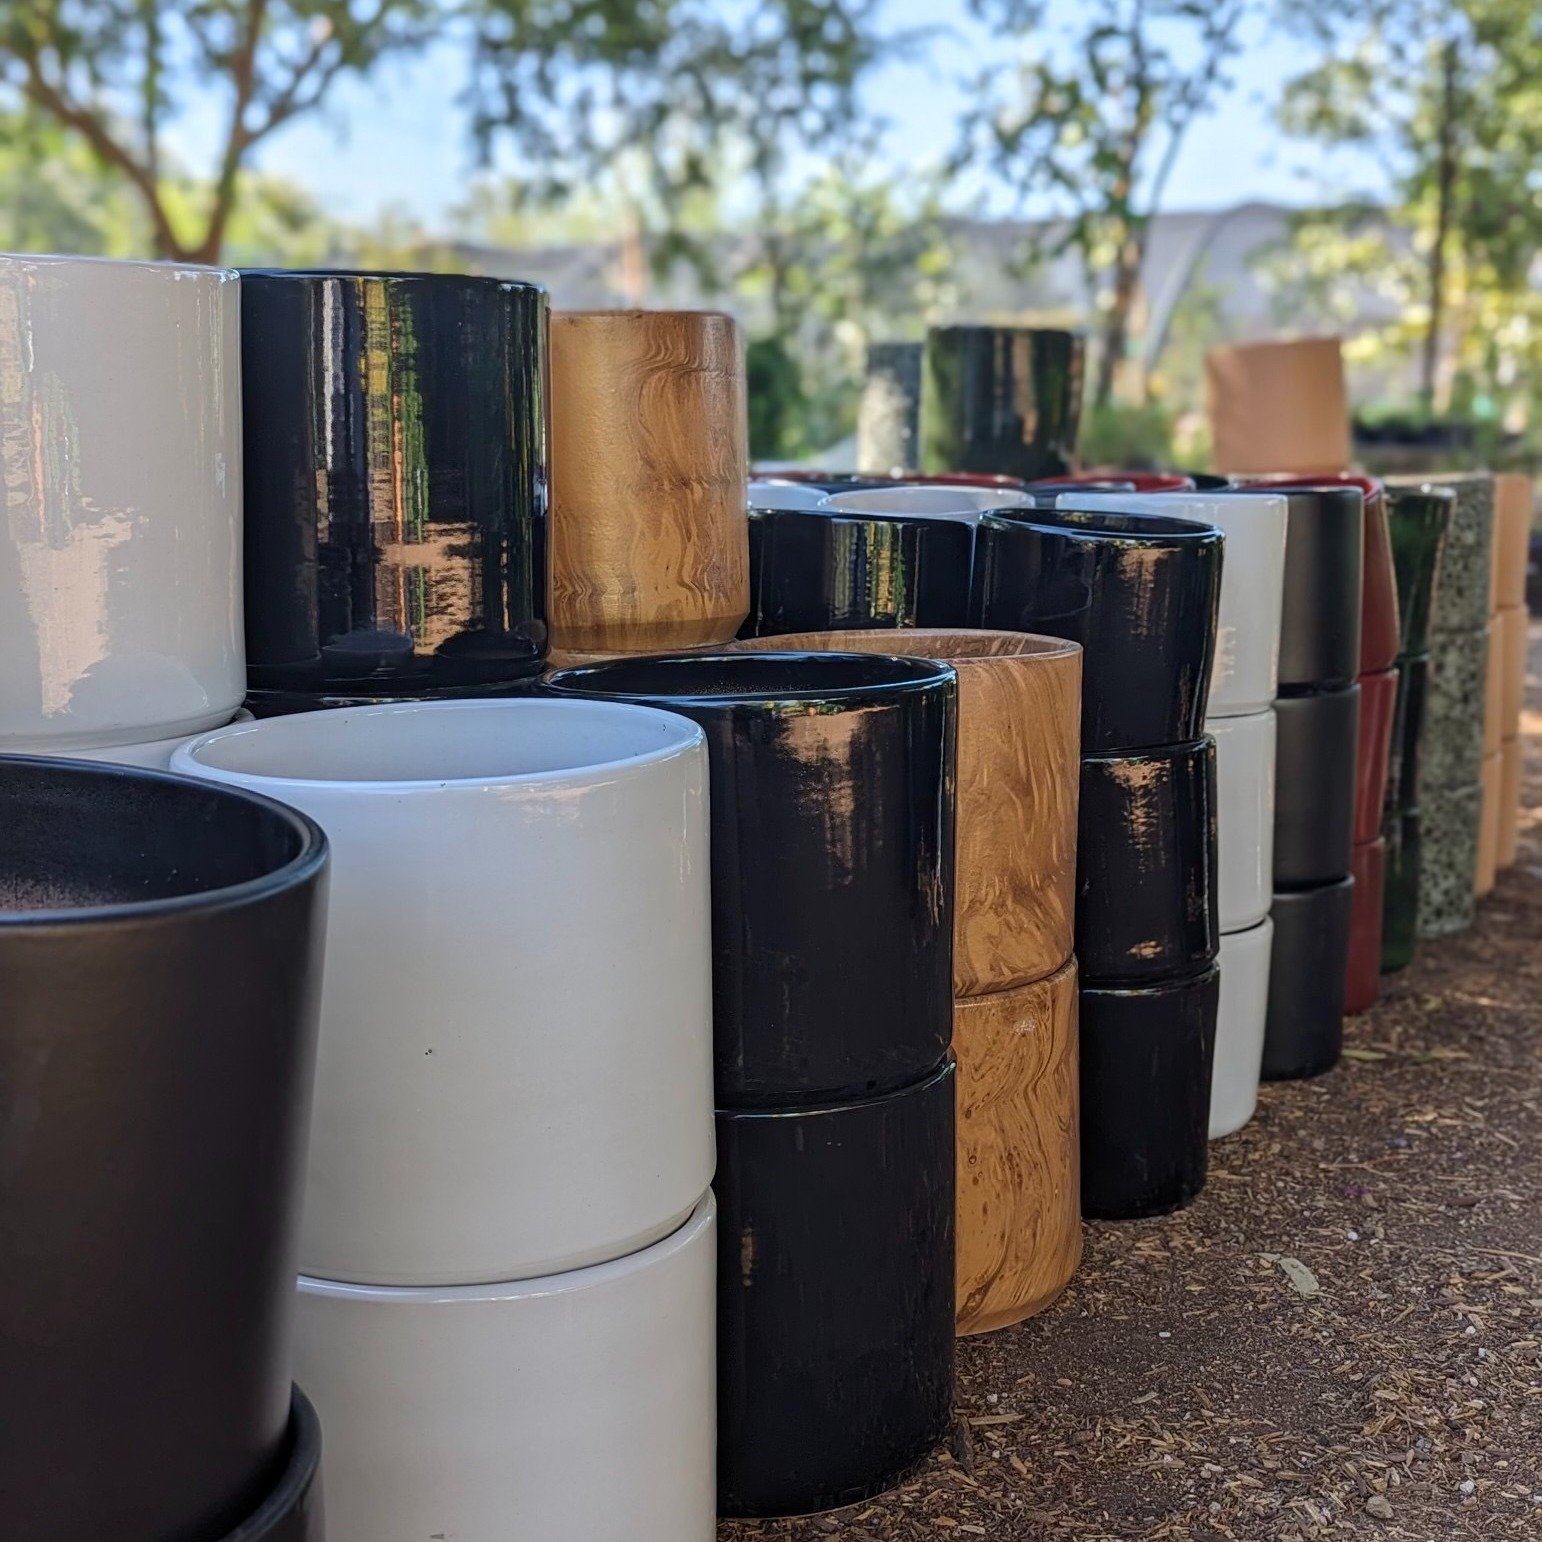 Fresh pottery drop...got a fresh new finish on these classic cylinders.

As always...pick your pot + plant and we'll provide the assist on getting the right soil so those babies will thrive.

Mother's Day orders can still be sent our way online for p